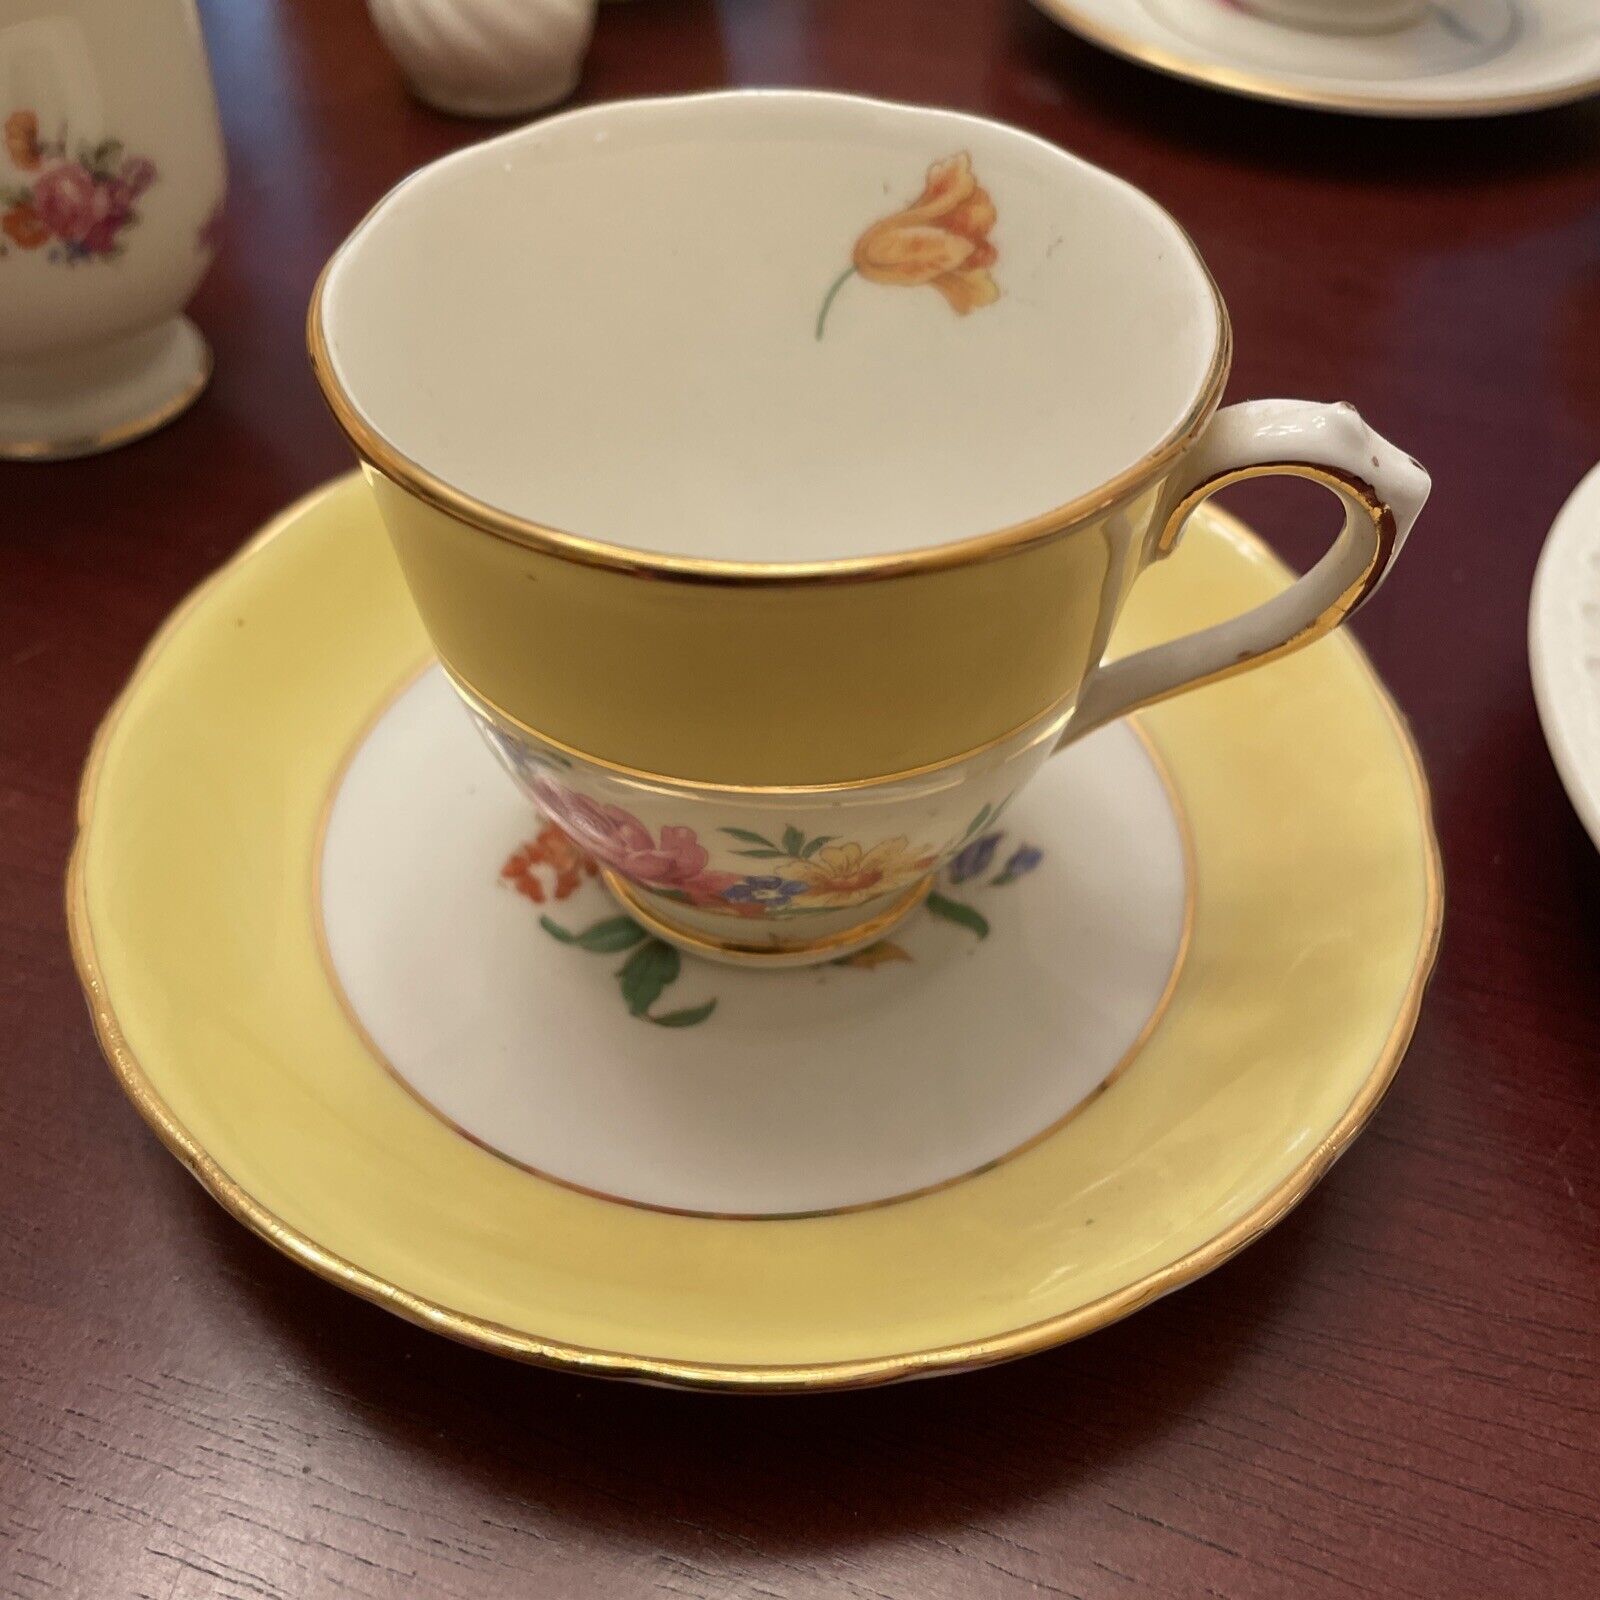 Vintage - 1930s -New Chelsea Staffs England Yellow & Floral Tea Cup & Saucer